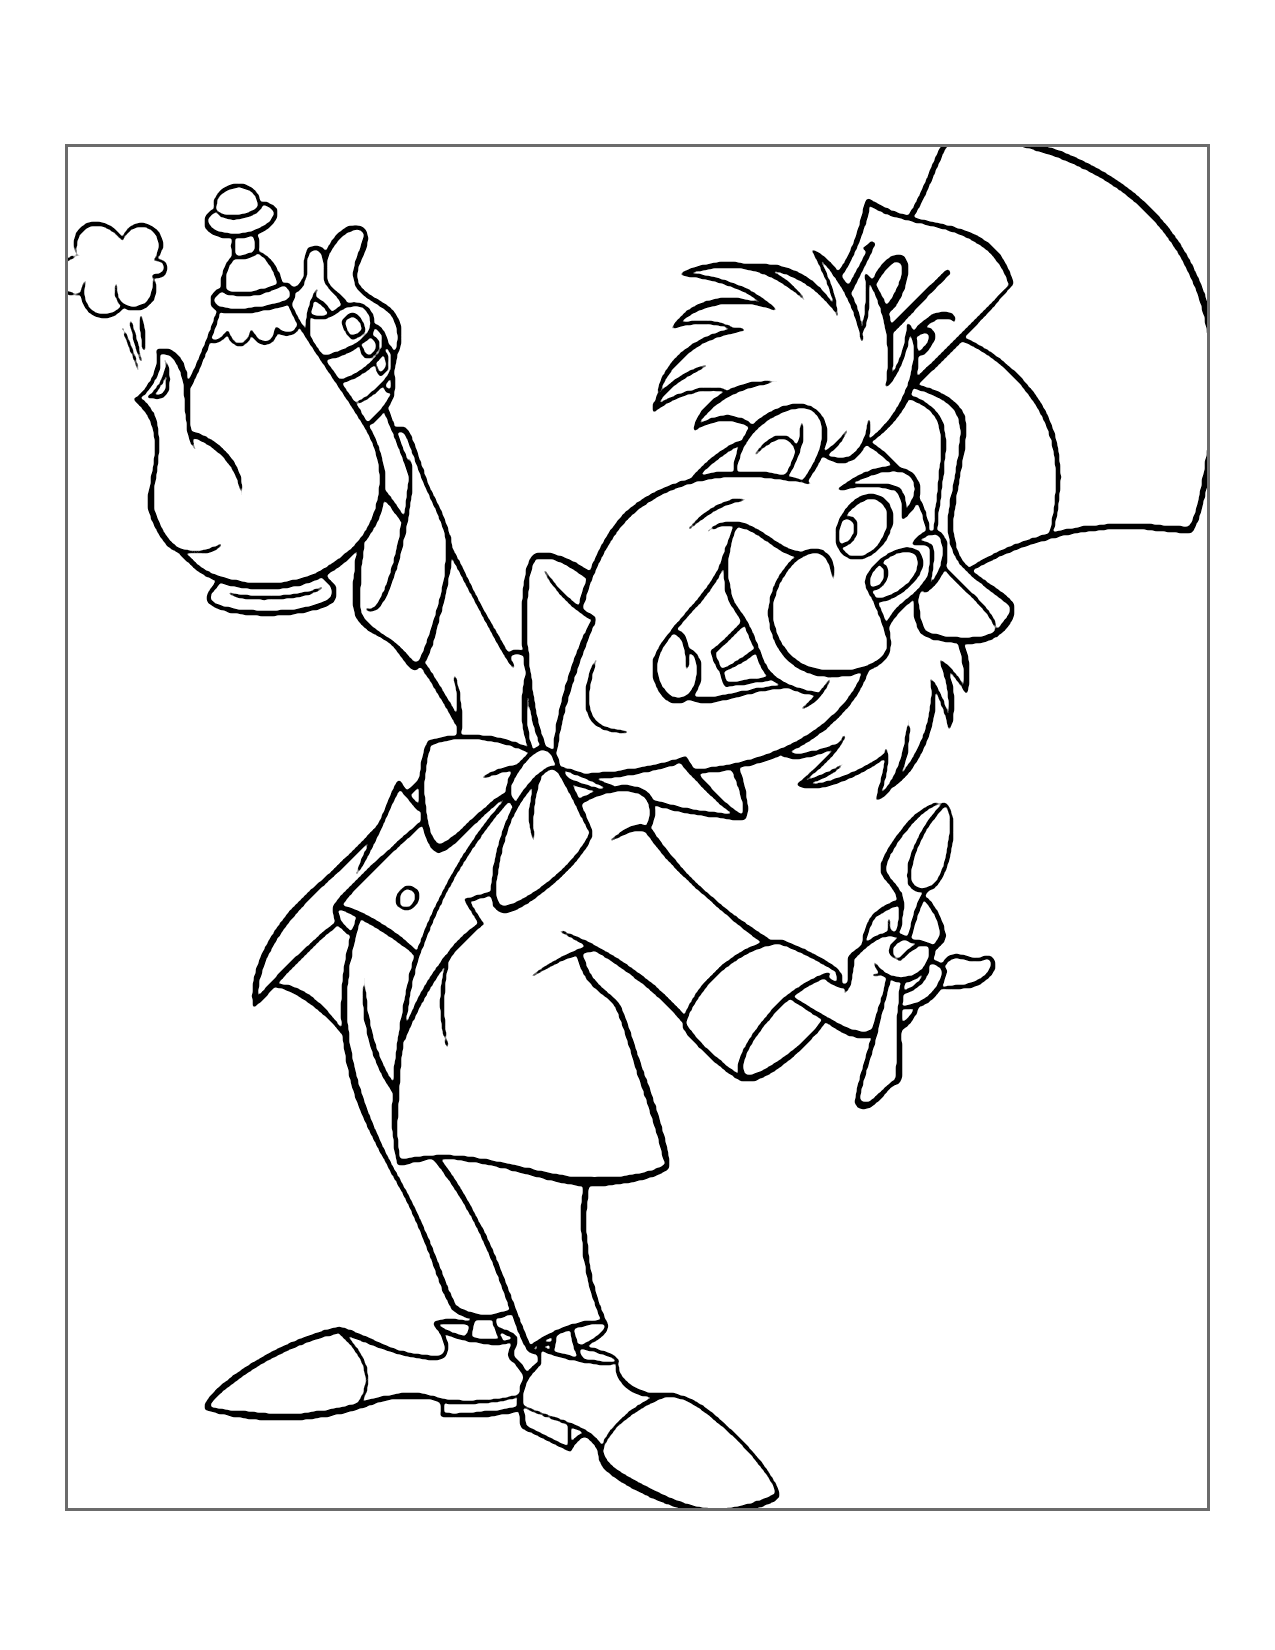 Disneys Mad Hatter Coloring Page